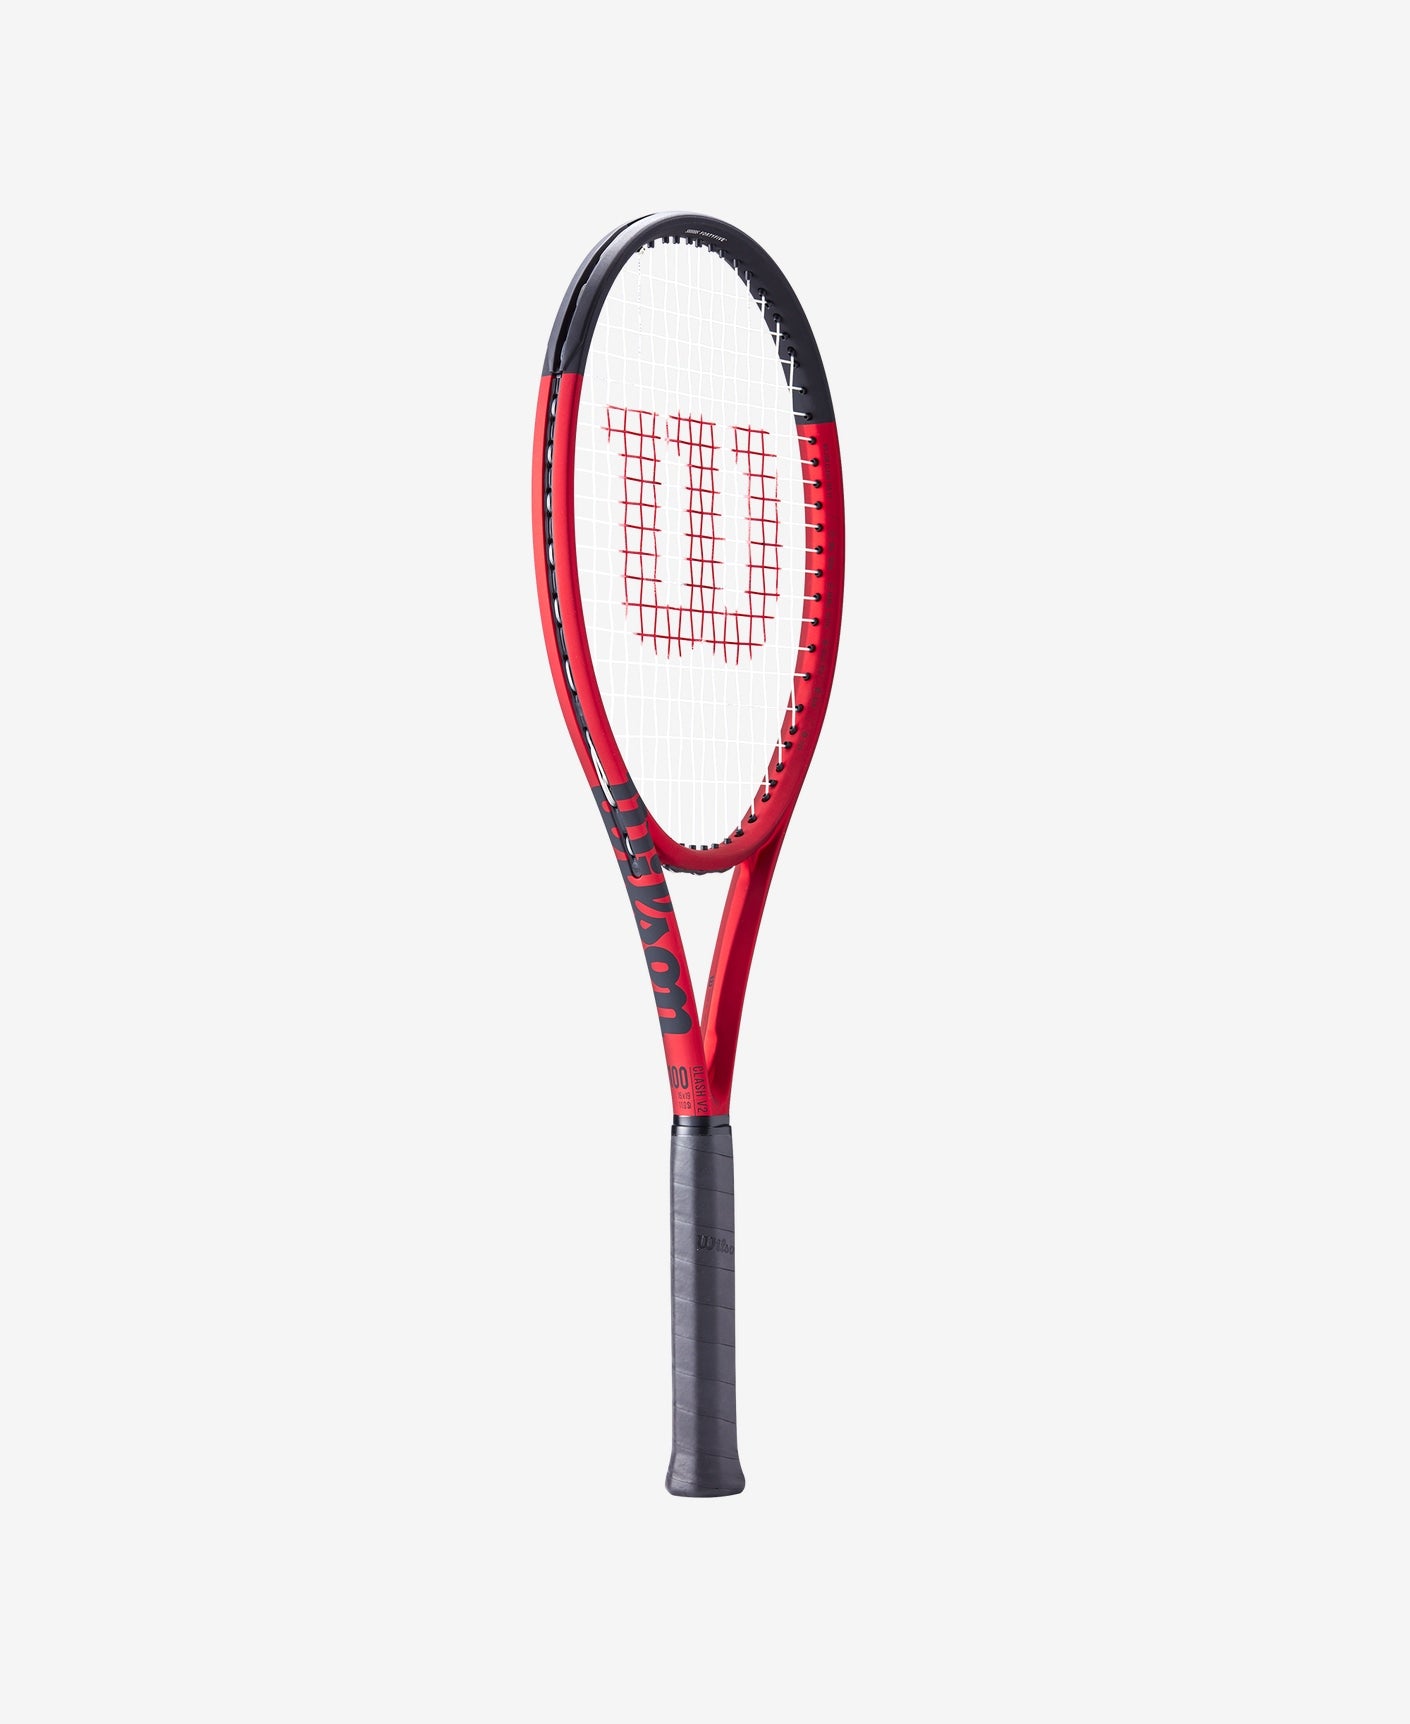 Power and control combined: Wilson Clash 100 v2 Tennis Racket